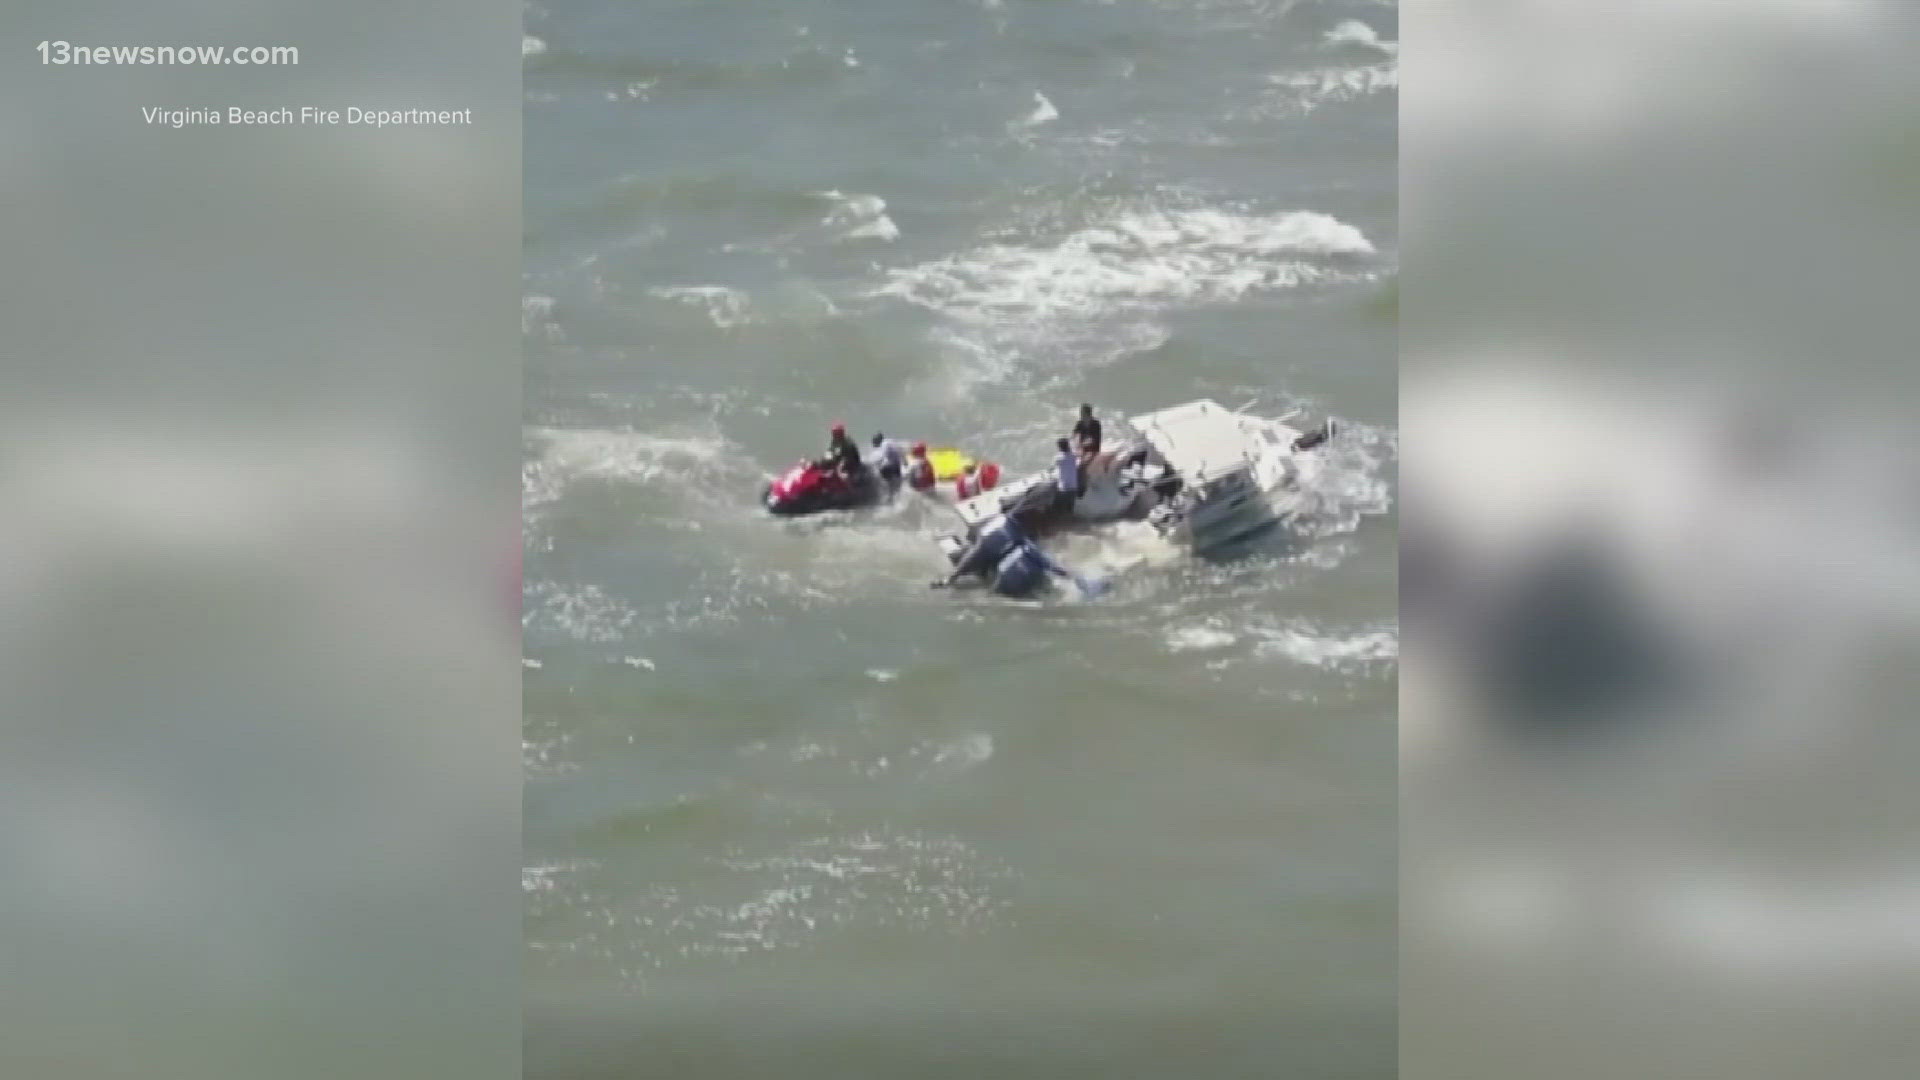 The Virginia Beach Fire Department helped rescue several people after their boat ran aground and began taking on water!